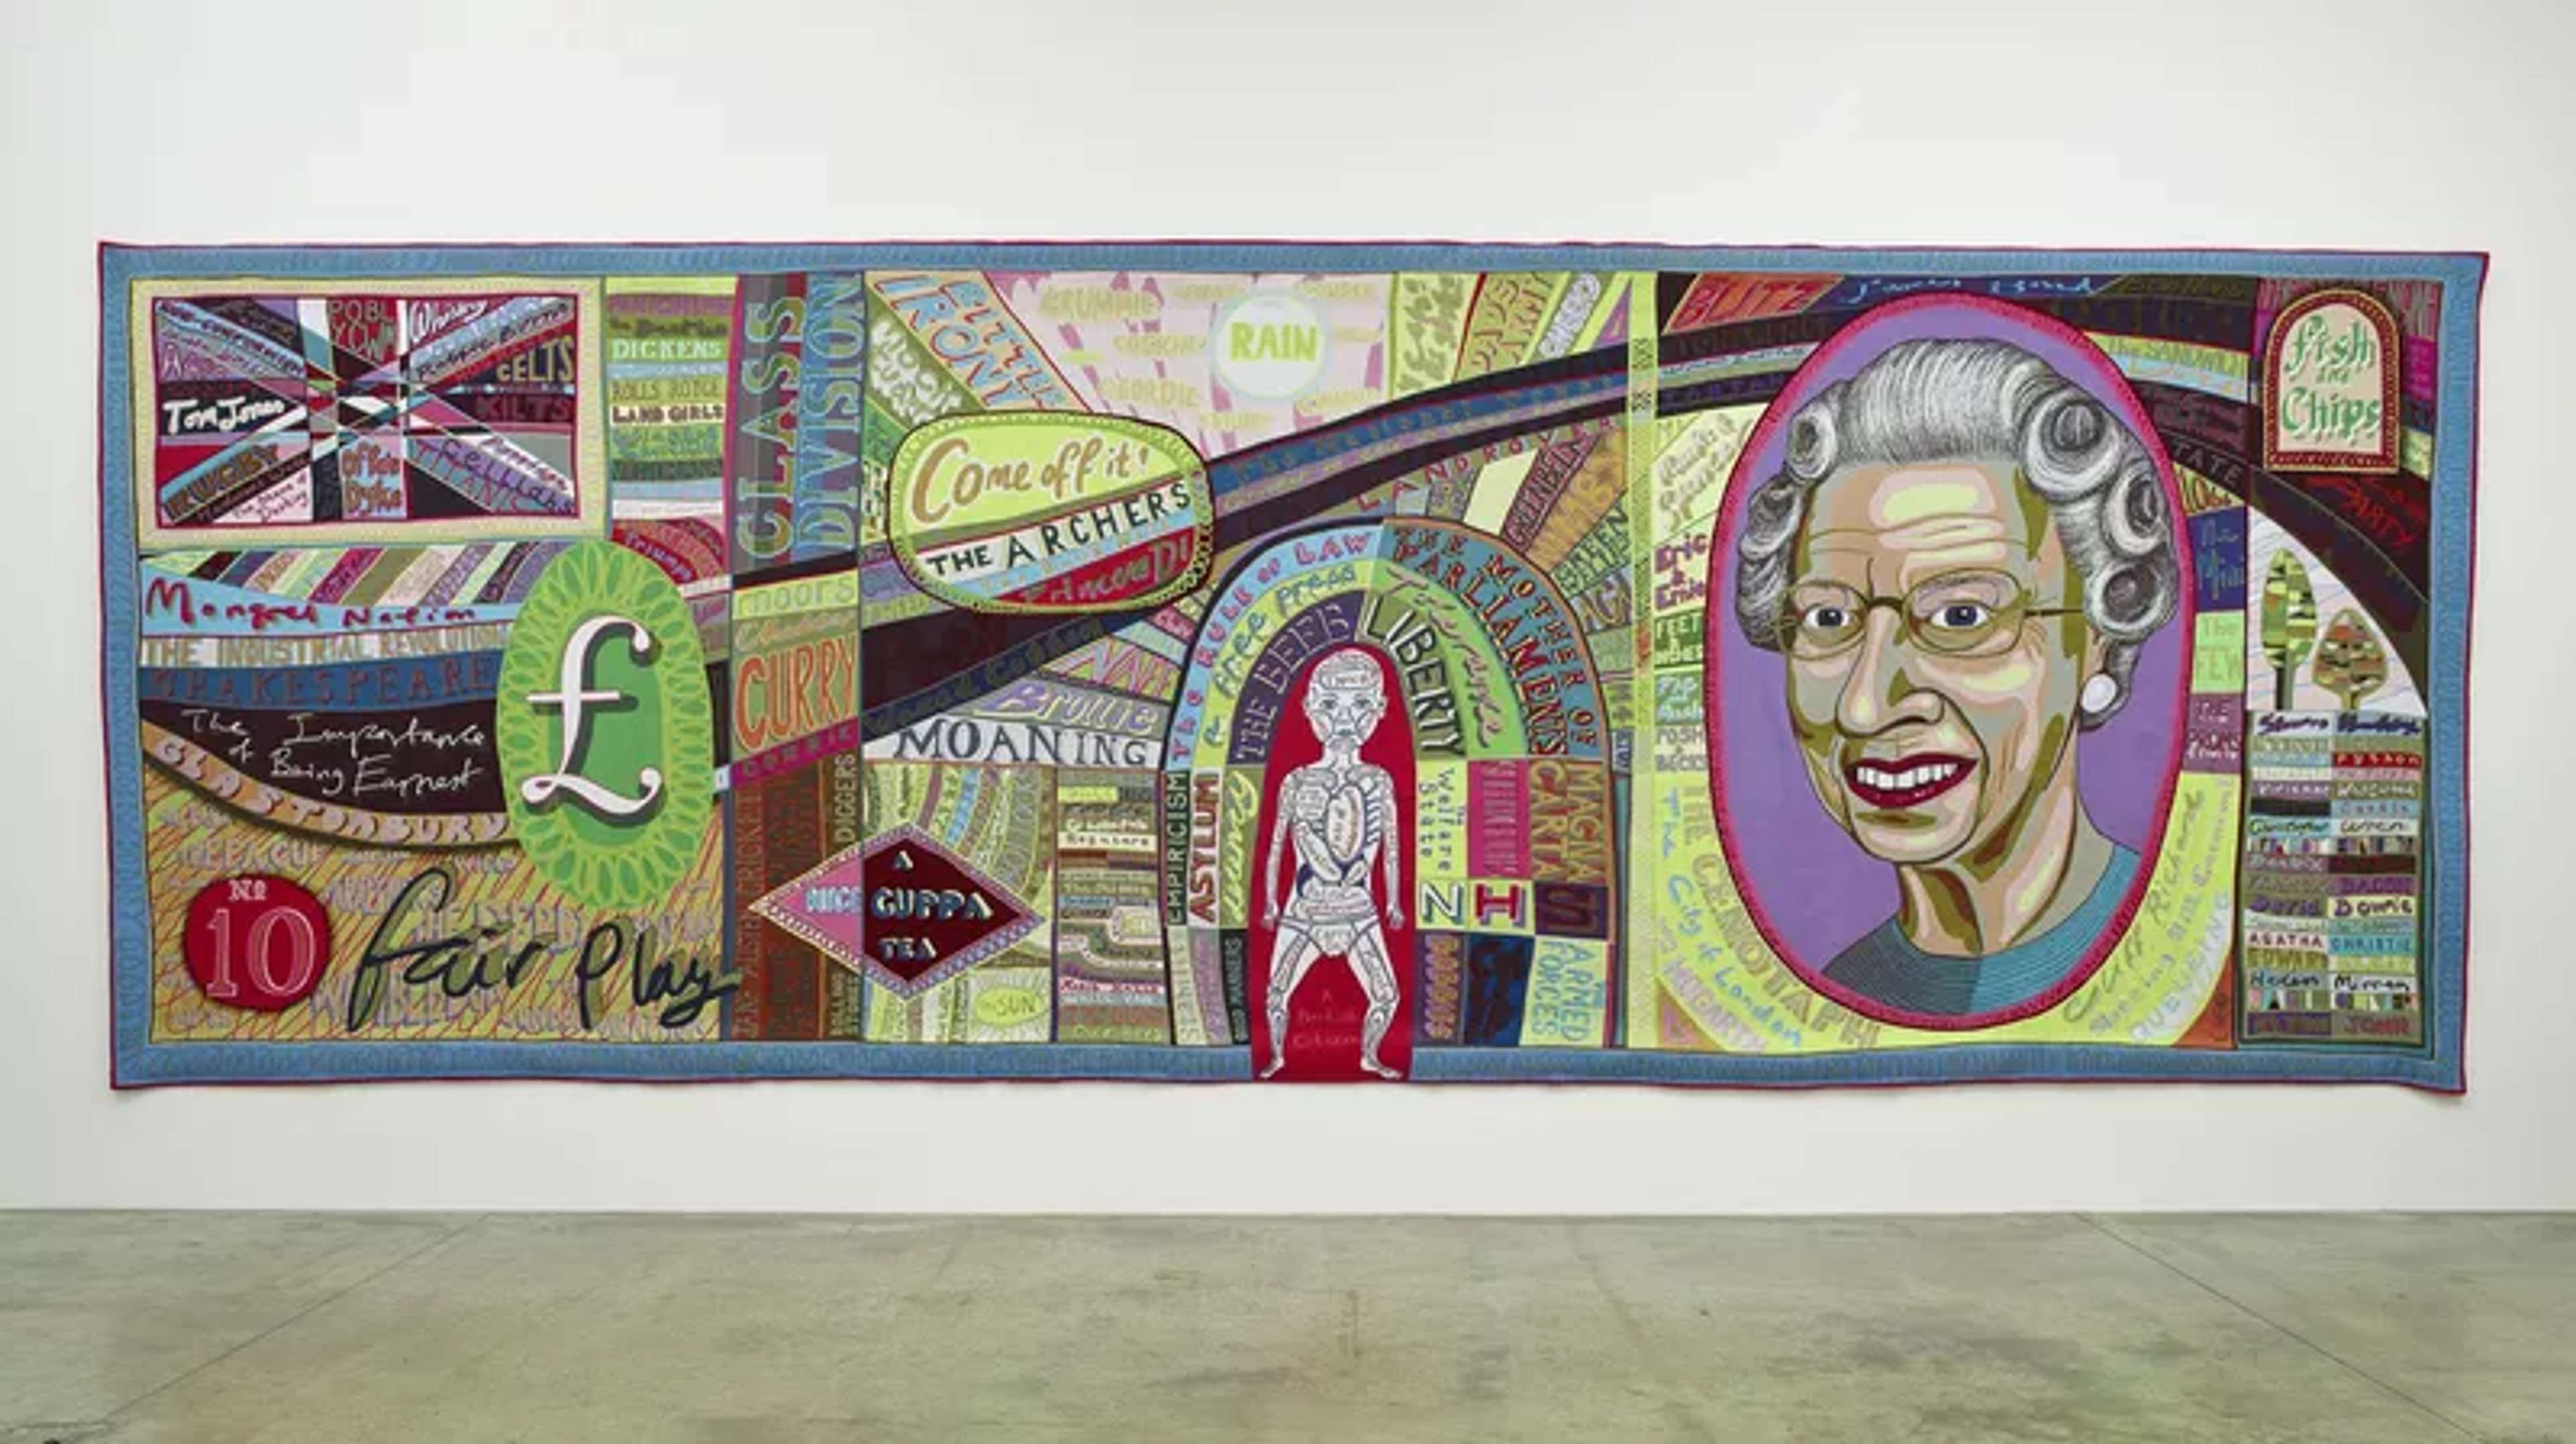 A vibrant tapestry by Grayson Perry featuring visual icons of British culture, including Queen Elizabeth II, a pound sign, and phrases popular in British English.